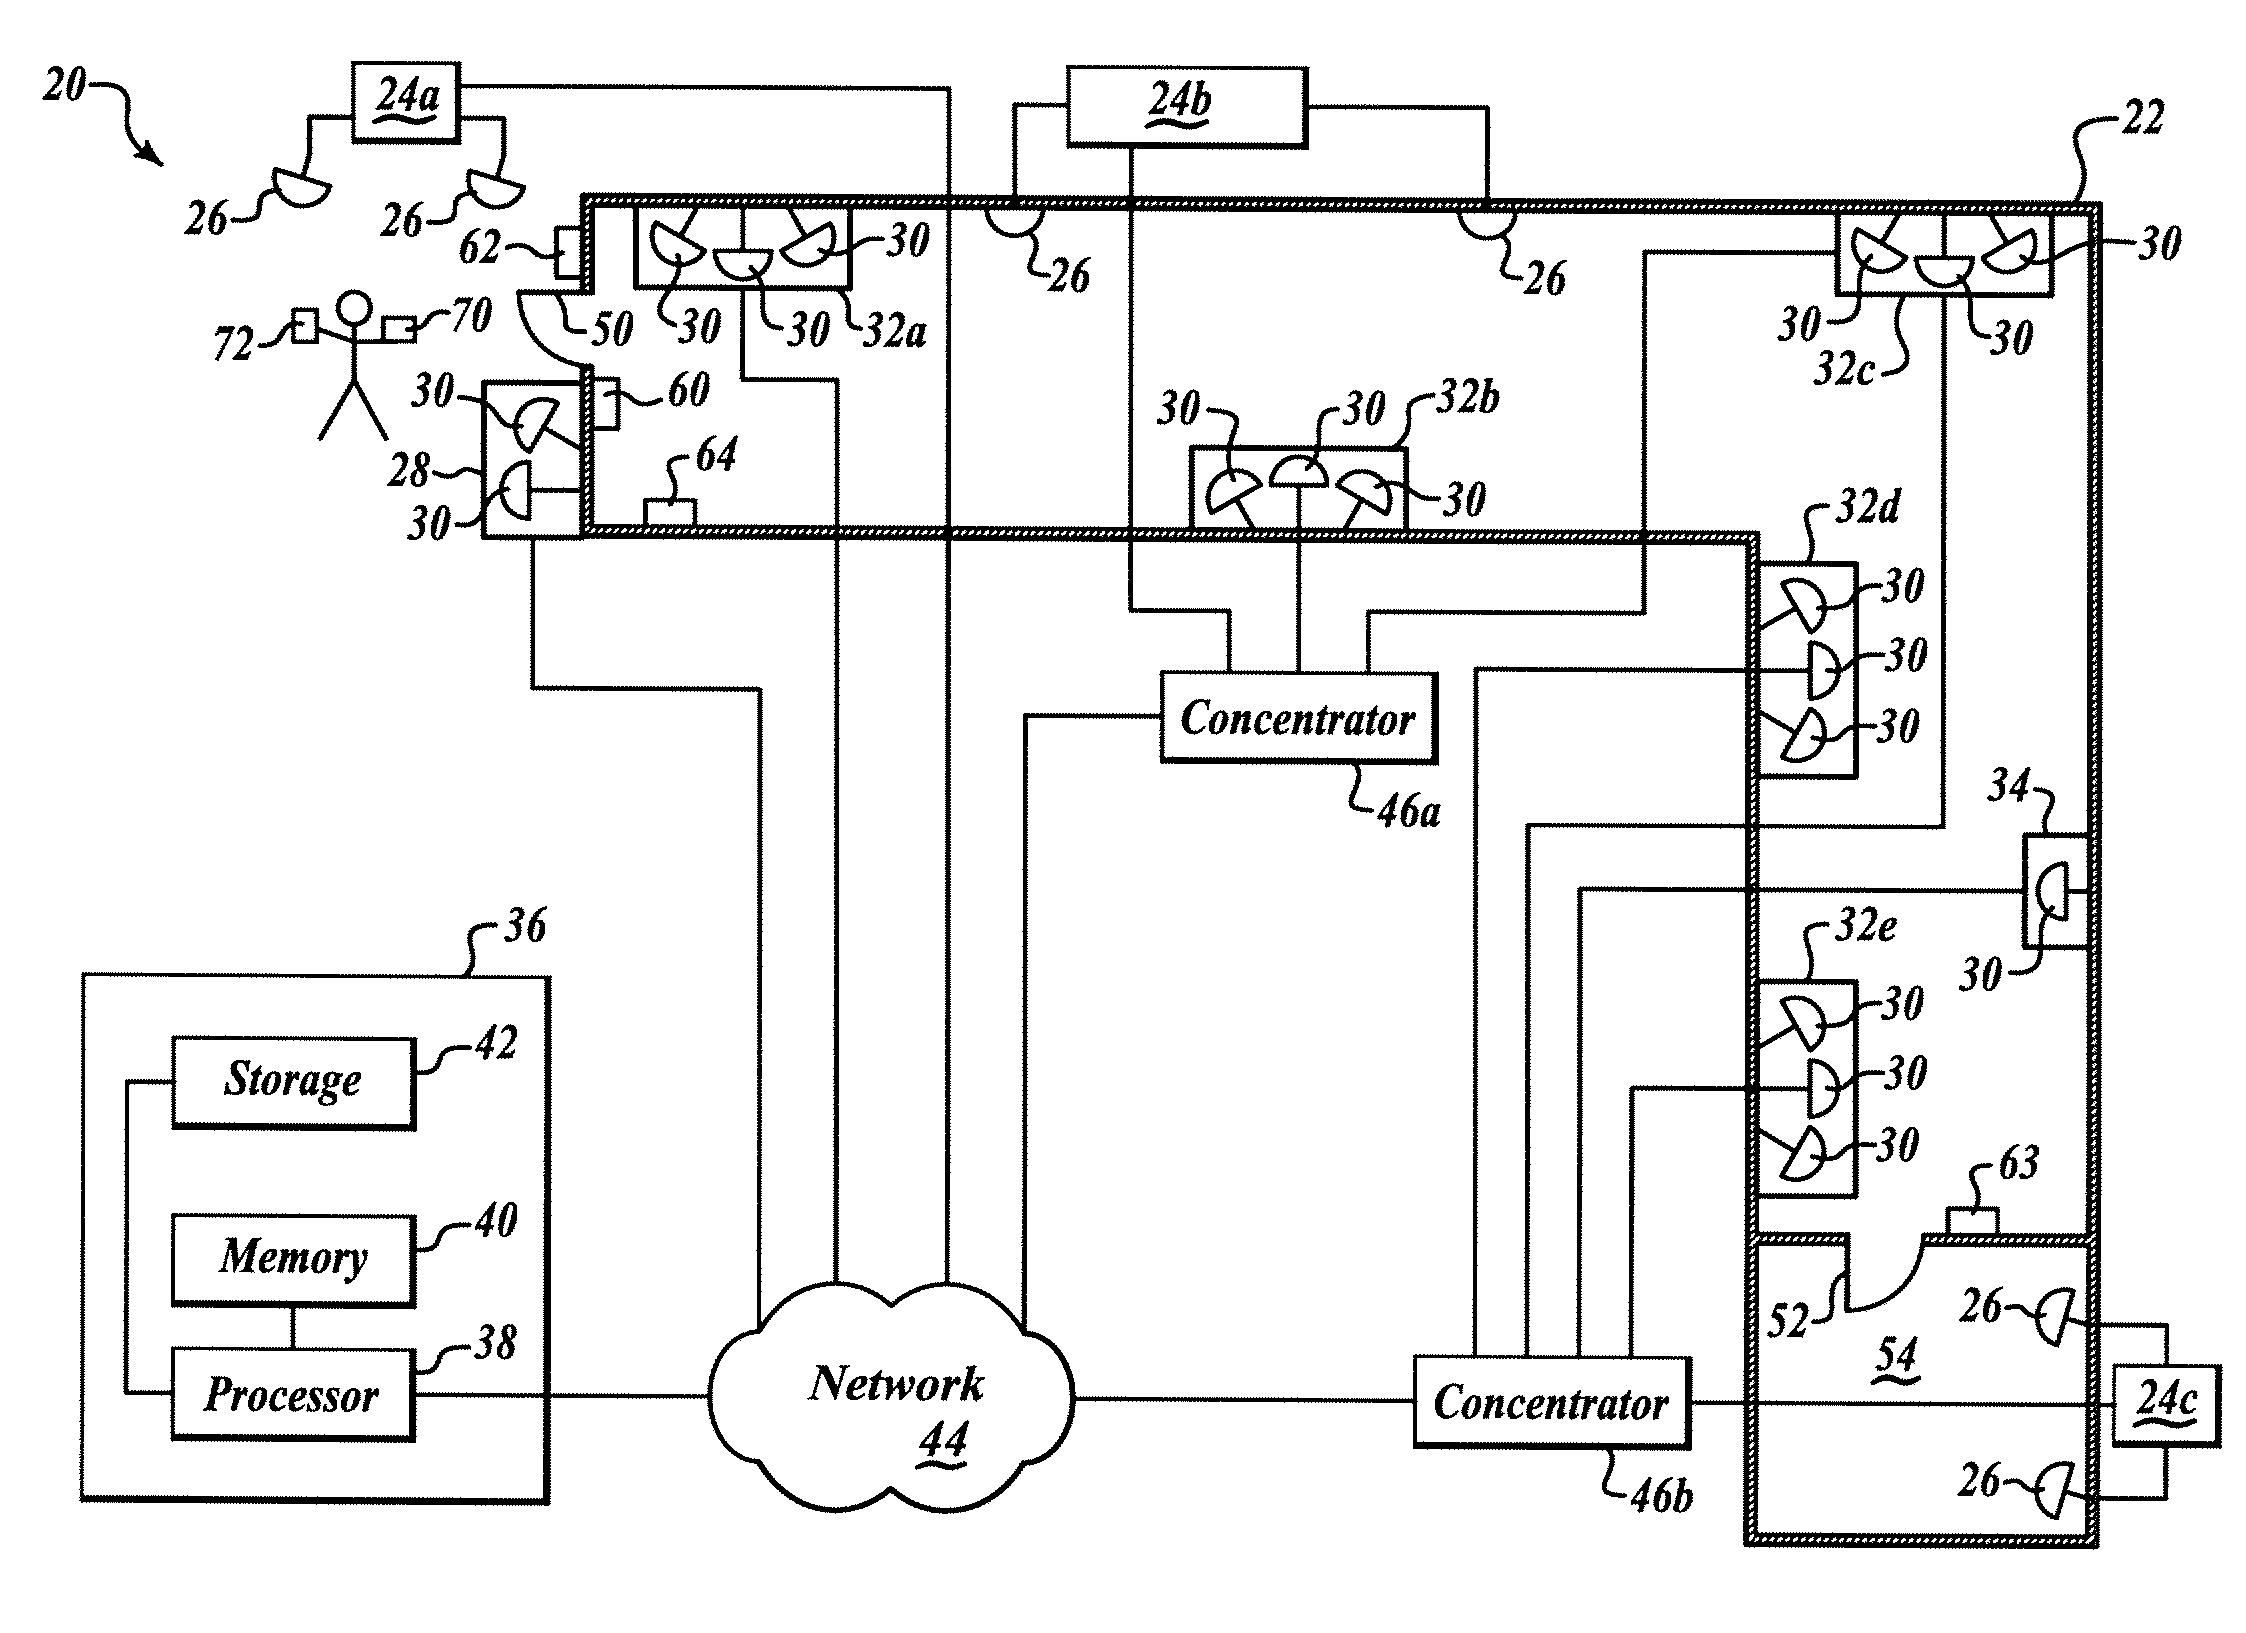 Systems and methods for object localization and path identification based on RFID sensing